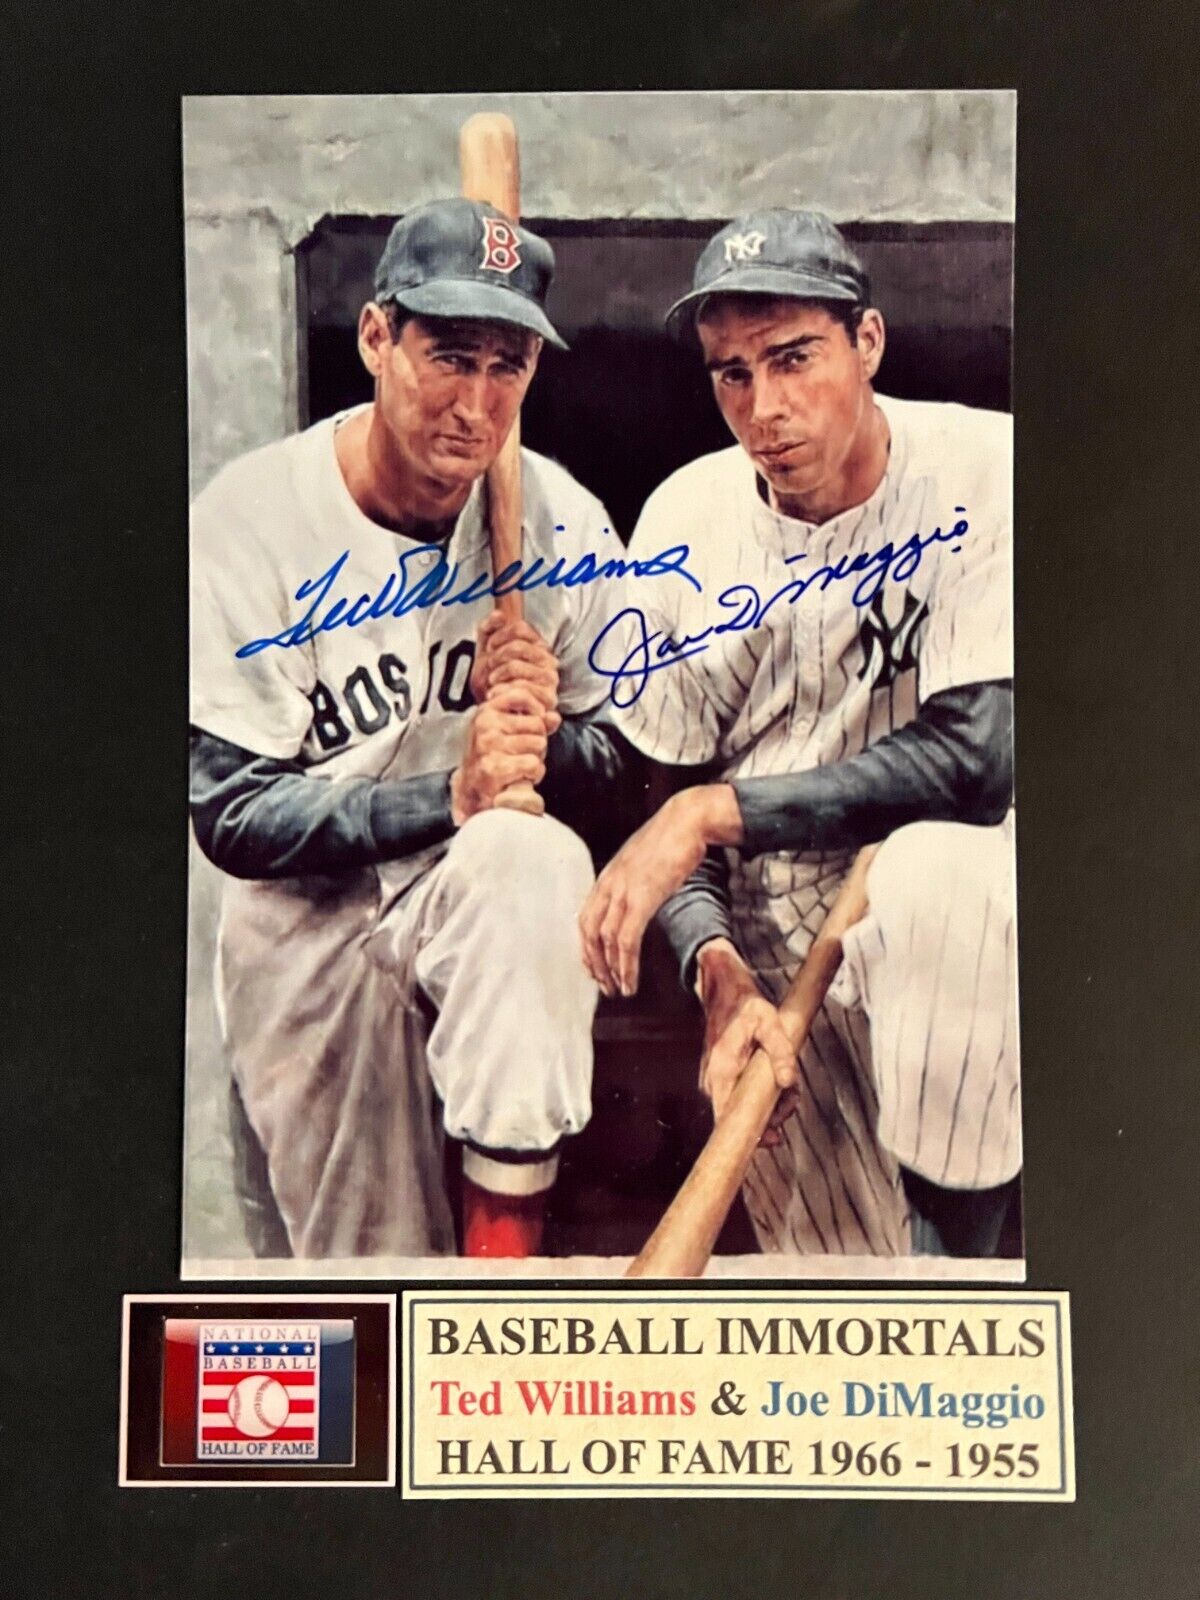 Joe DiMaggio and Ted Williams signed photo. 8x10 inches